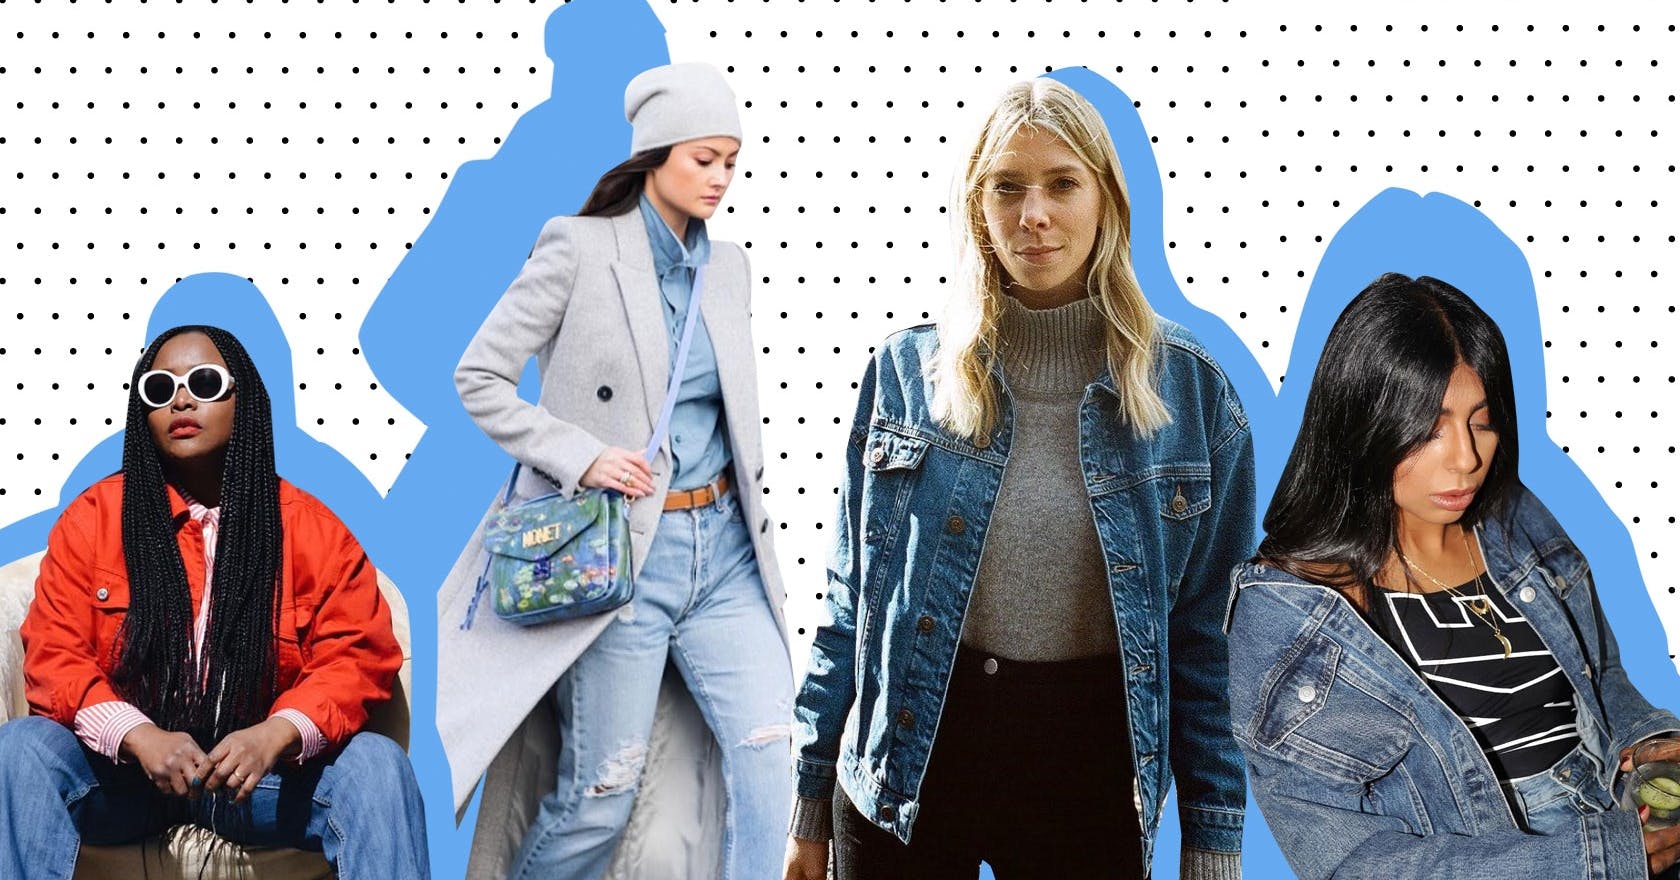 4 tips on styling your denim jacket from fashion influencers